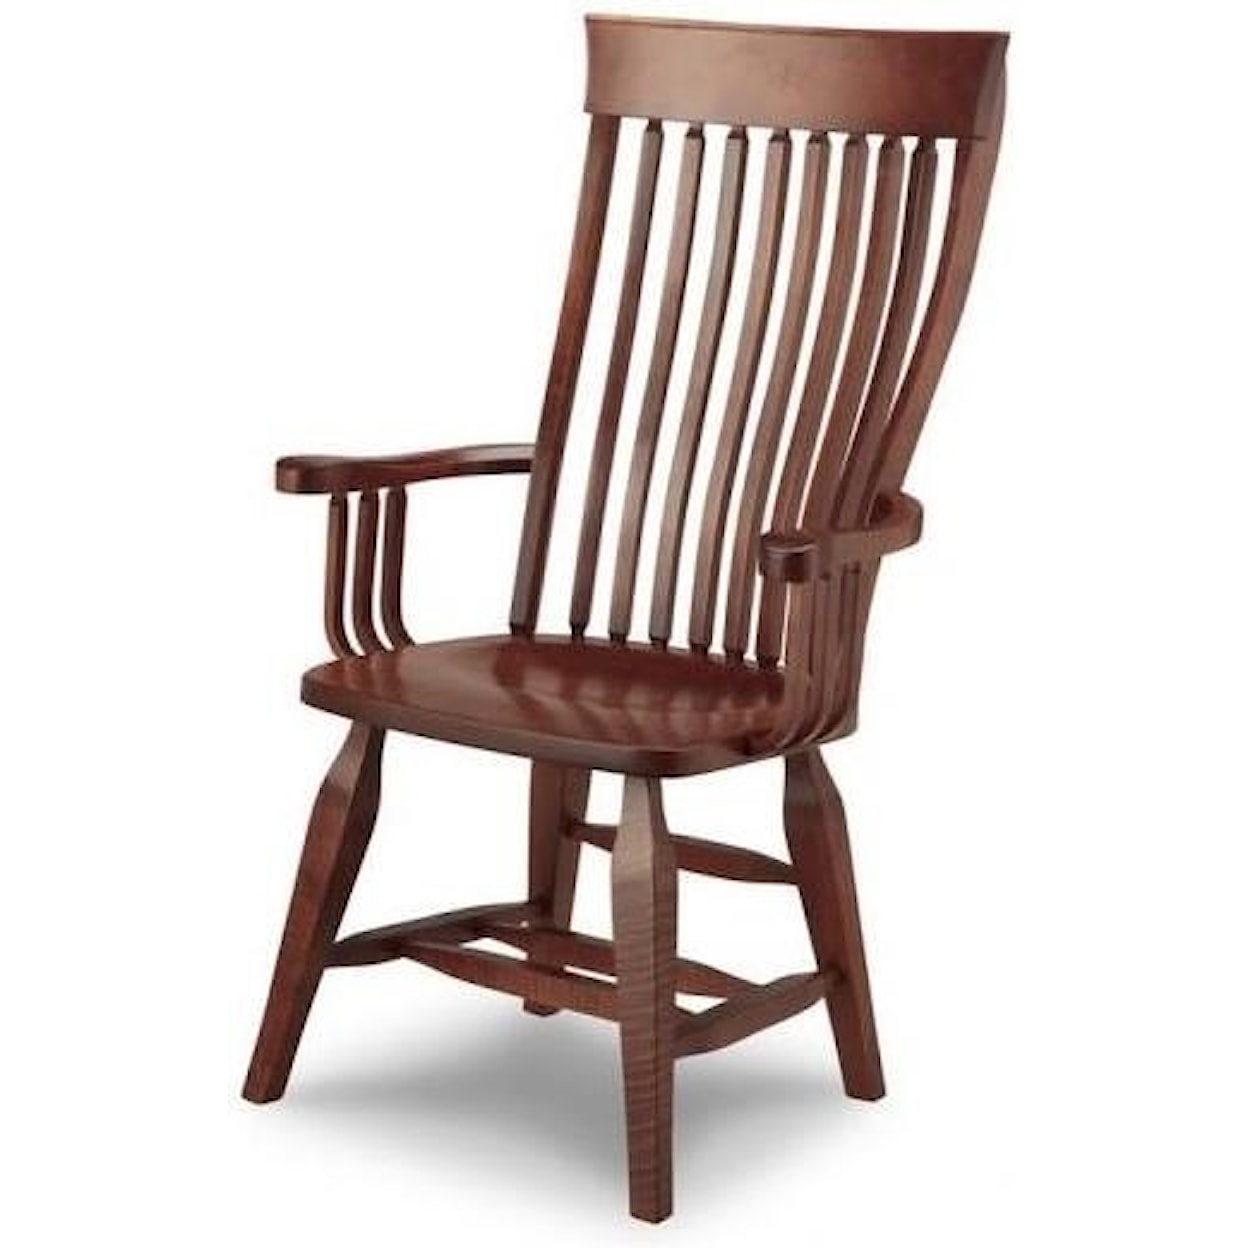 Handstone Florence Arm Chair with Wood Seat